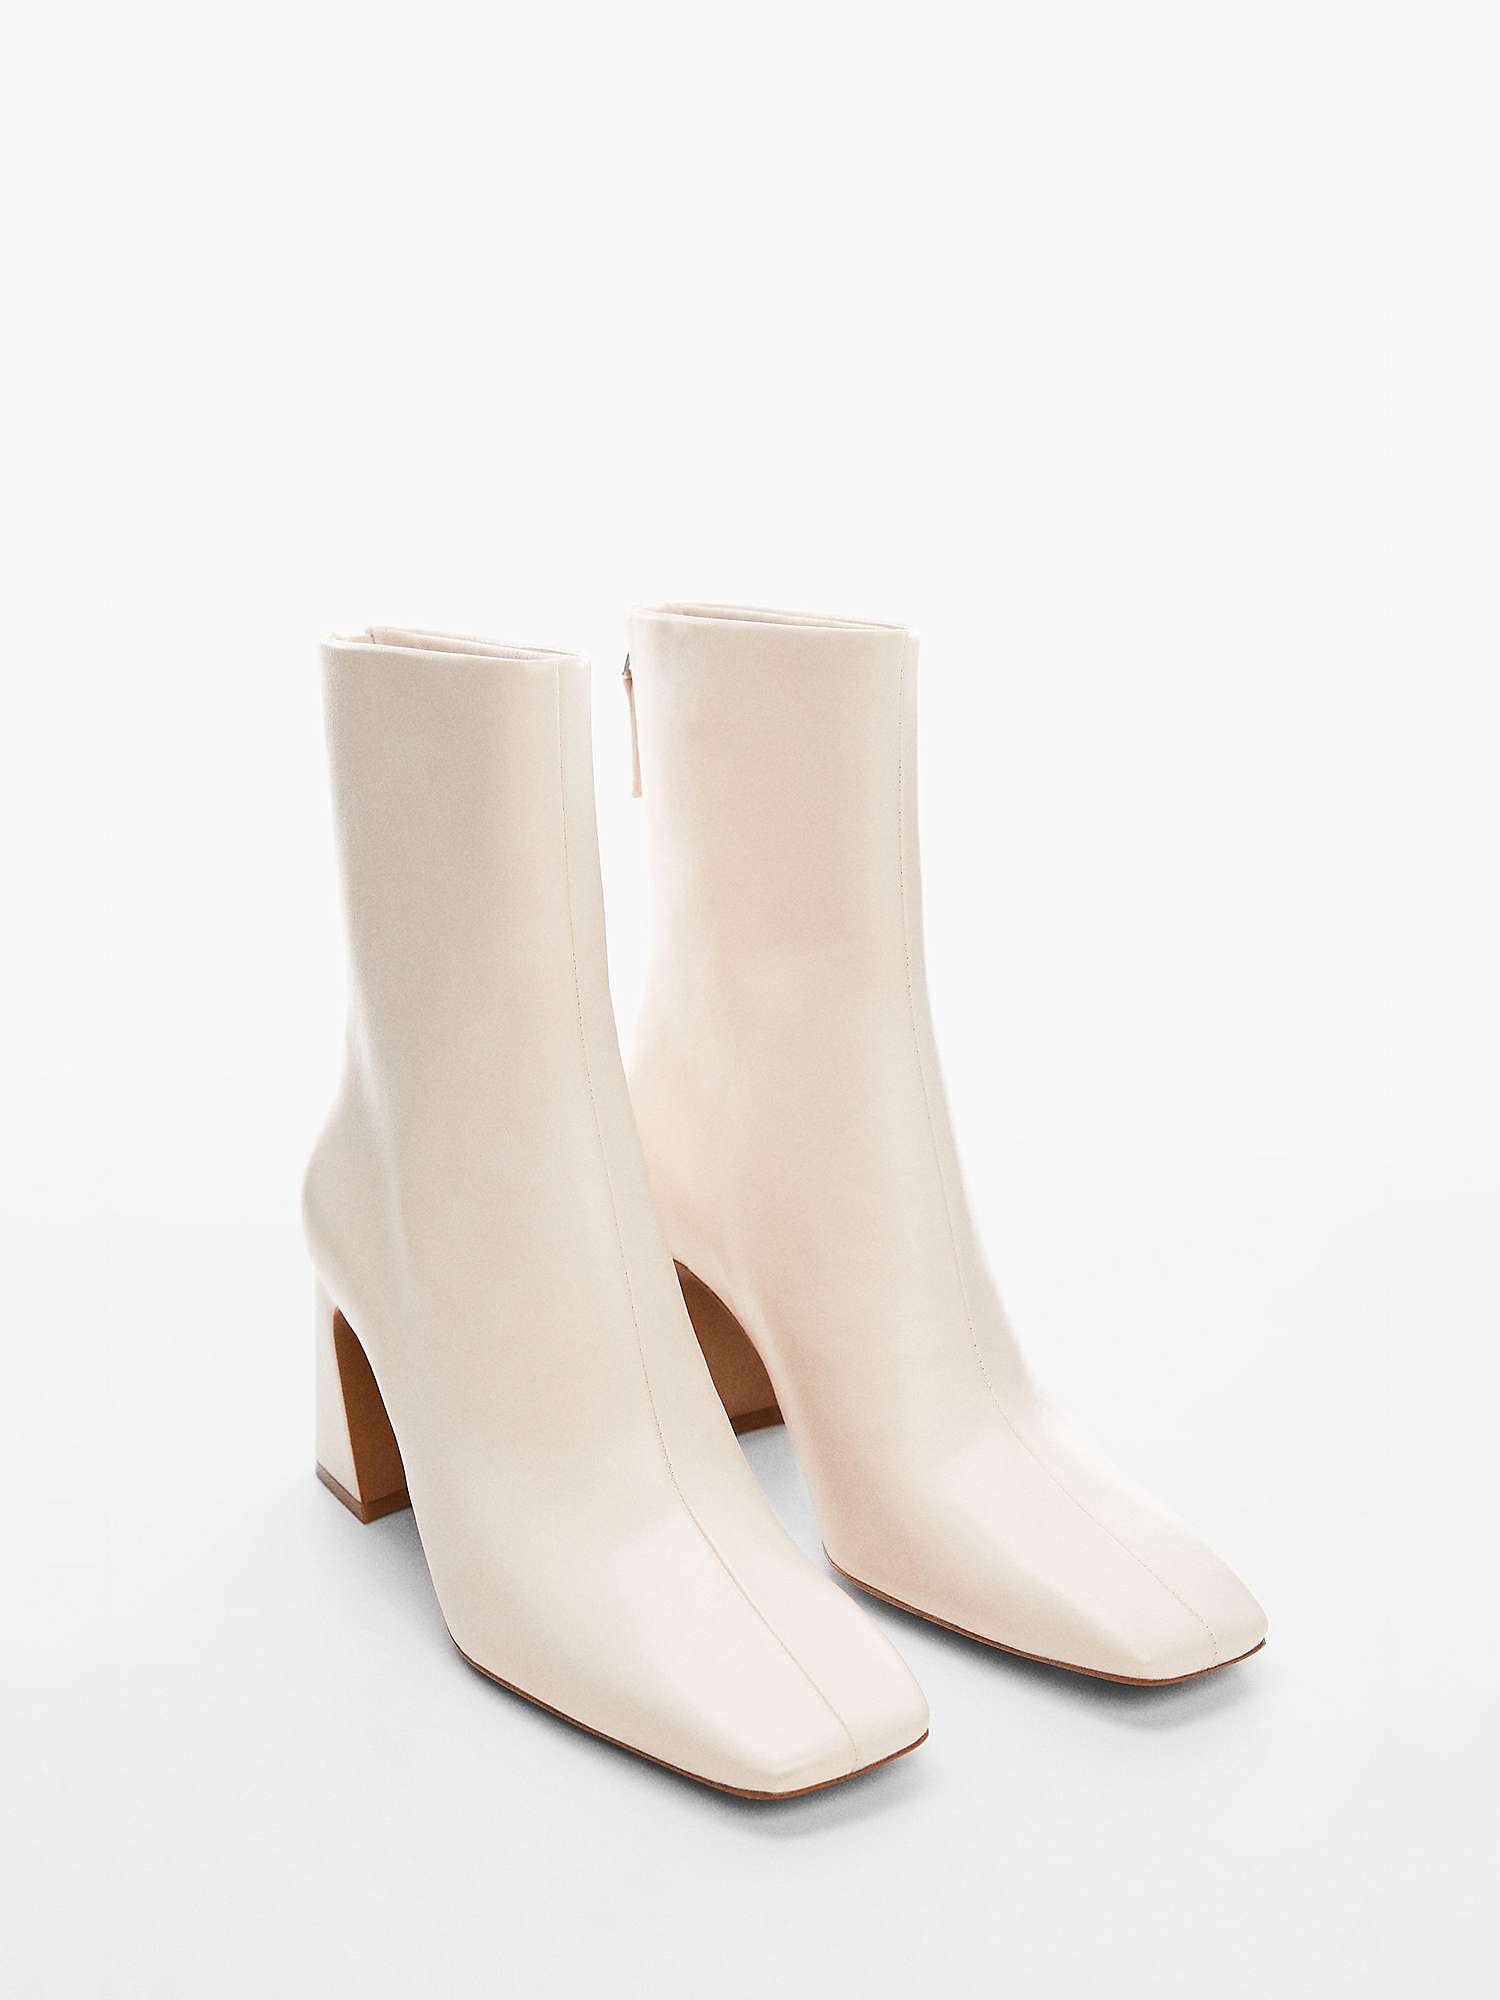 Buy Mango Square Toe Ankle Boots Online at johnlewis.com